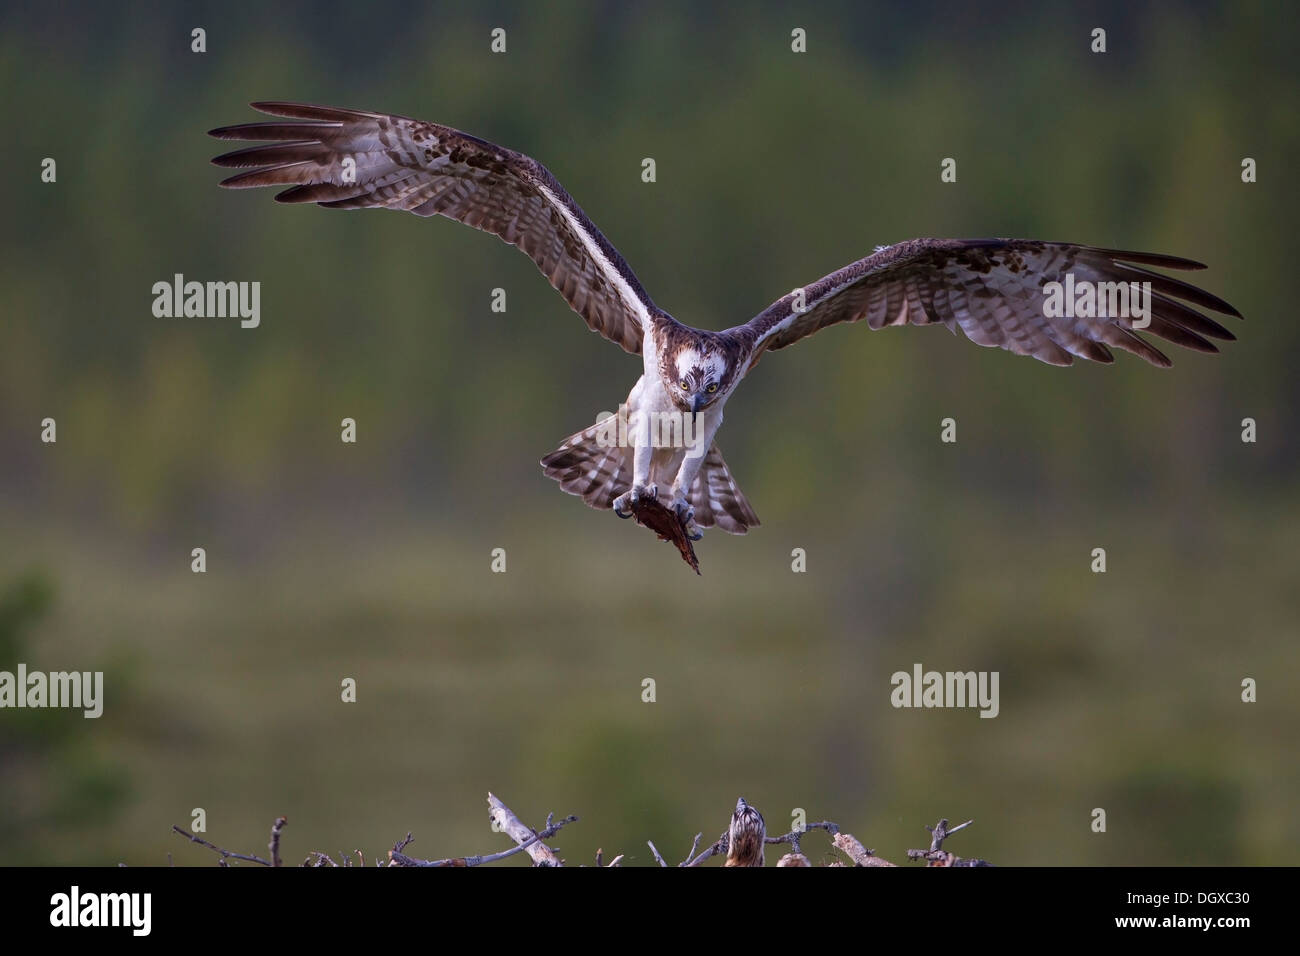 Osprey or Sea Hawk (Pandion haliaetus) with nesting material approaching to land on an eyrie, Kajaani sub-region, Finland Stock Photo